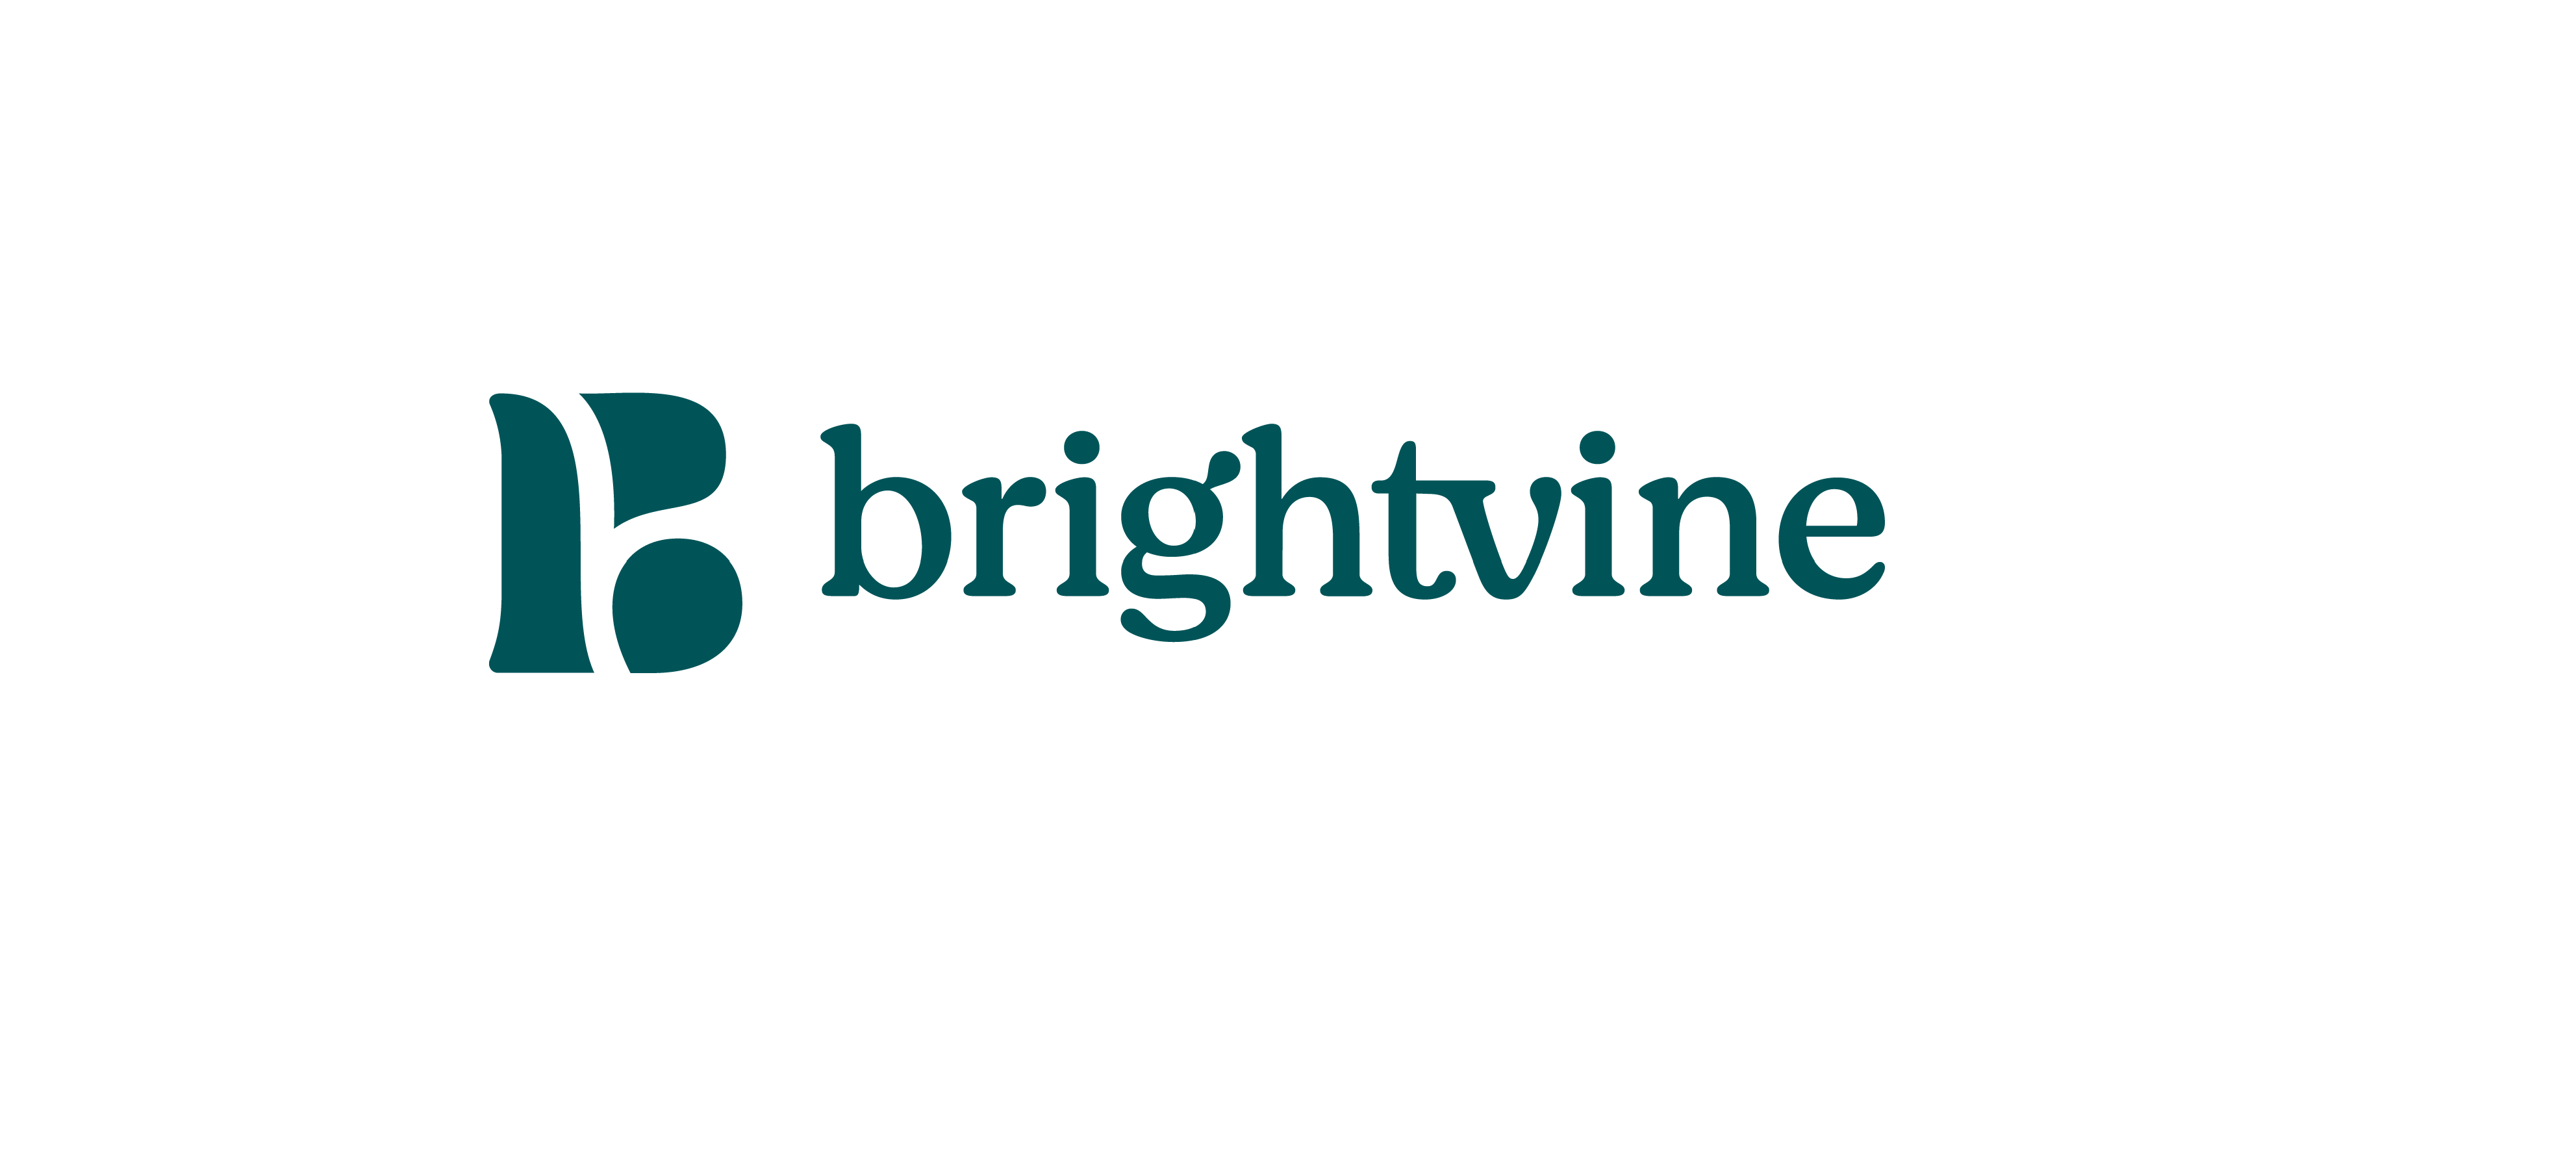 Interview with Brightvine CEO on tokenised real estate